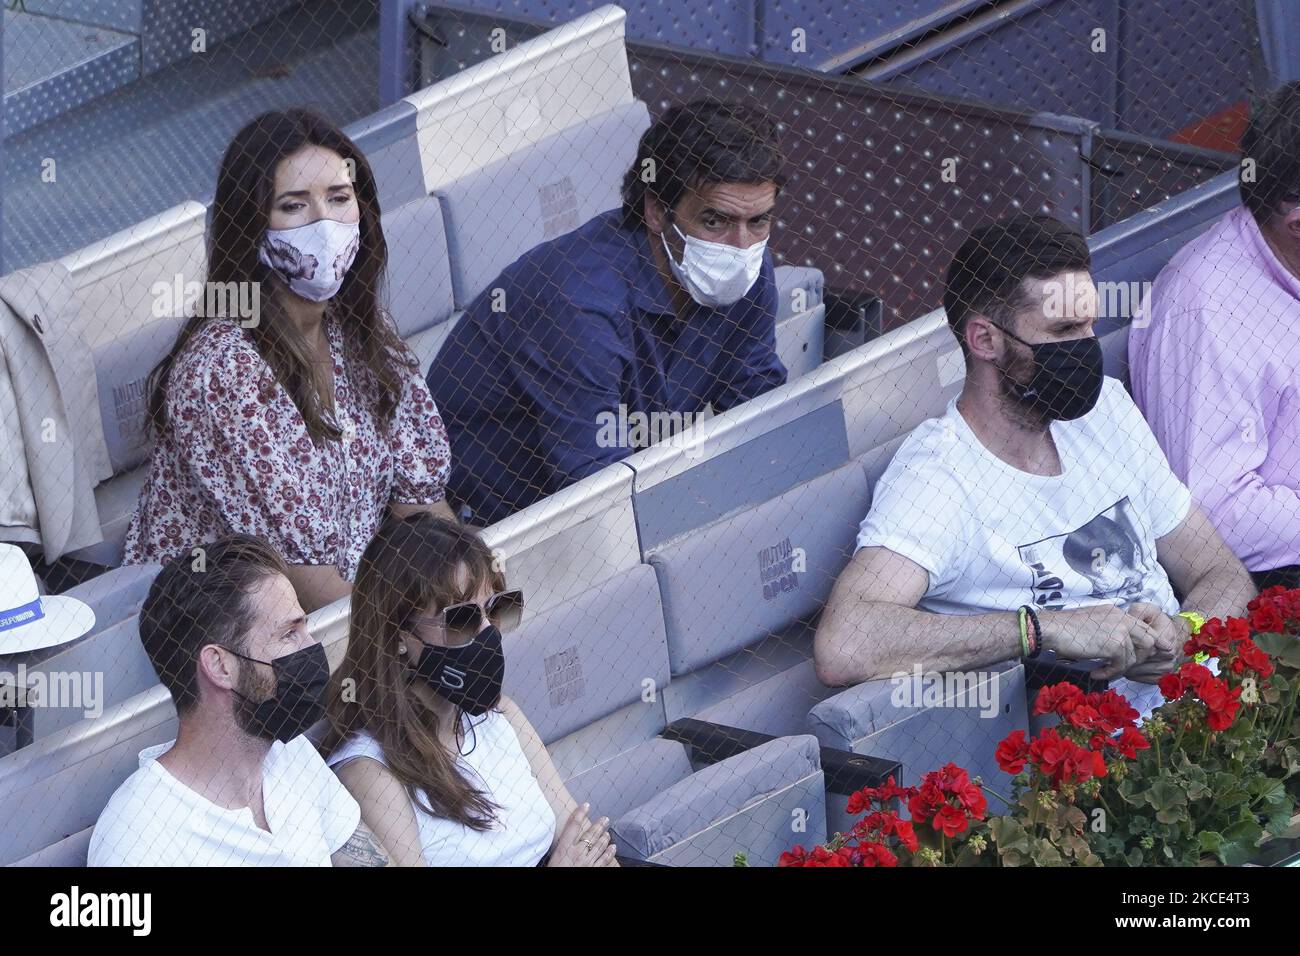 Raul Gonzalez Blanco and Mamen Sanz attended the 2021 ATP Tour Madrid Open tennis tournament singles quarter-final match at the Caja Magica in Madrid on May 7, 2021 spain (Photo by Oscar Gonzalez/NurPhoto) Stock Photo